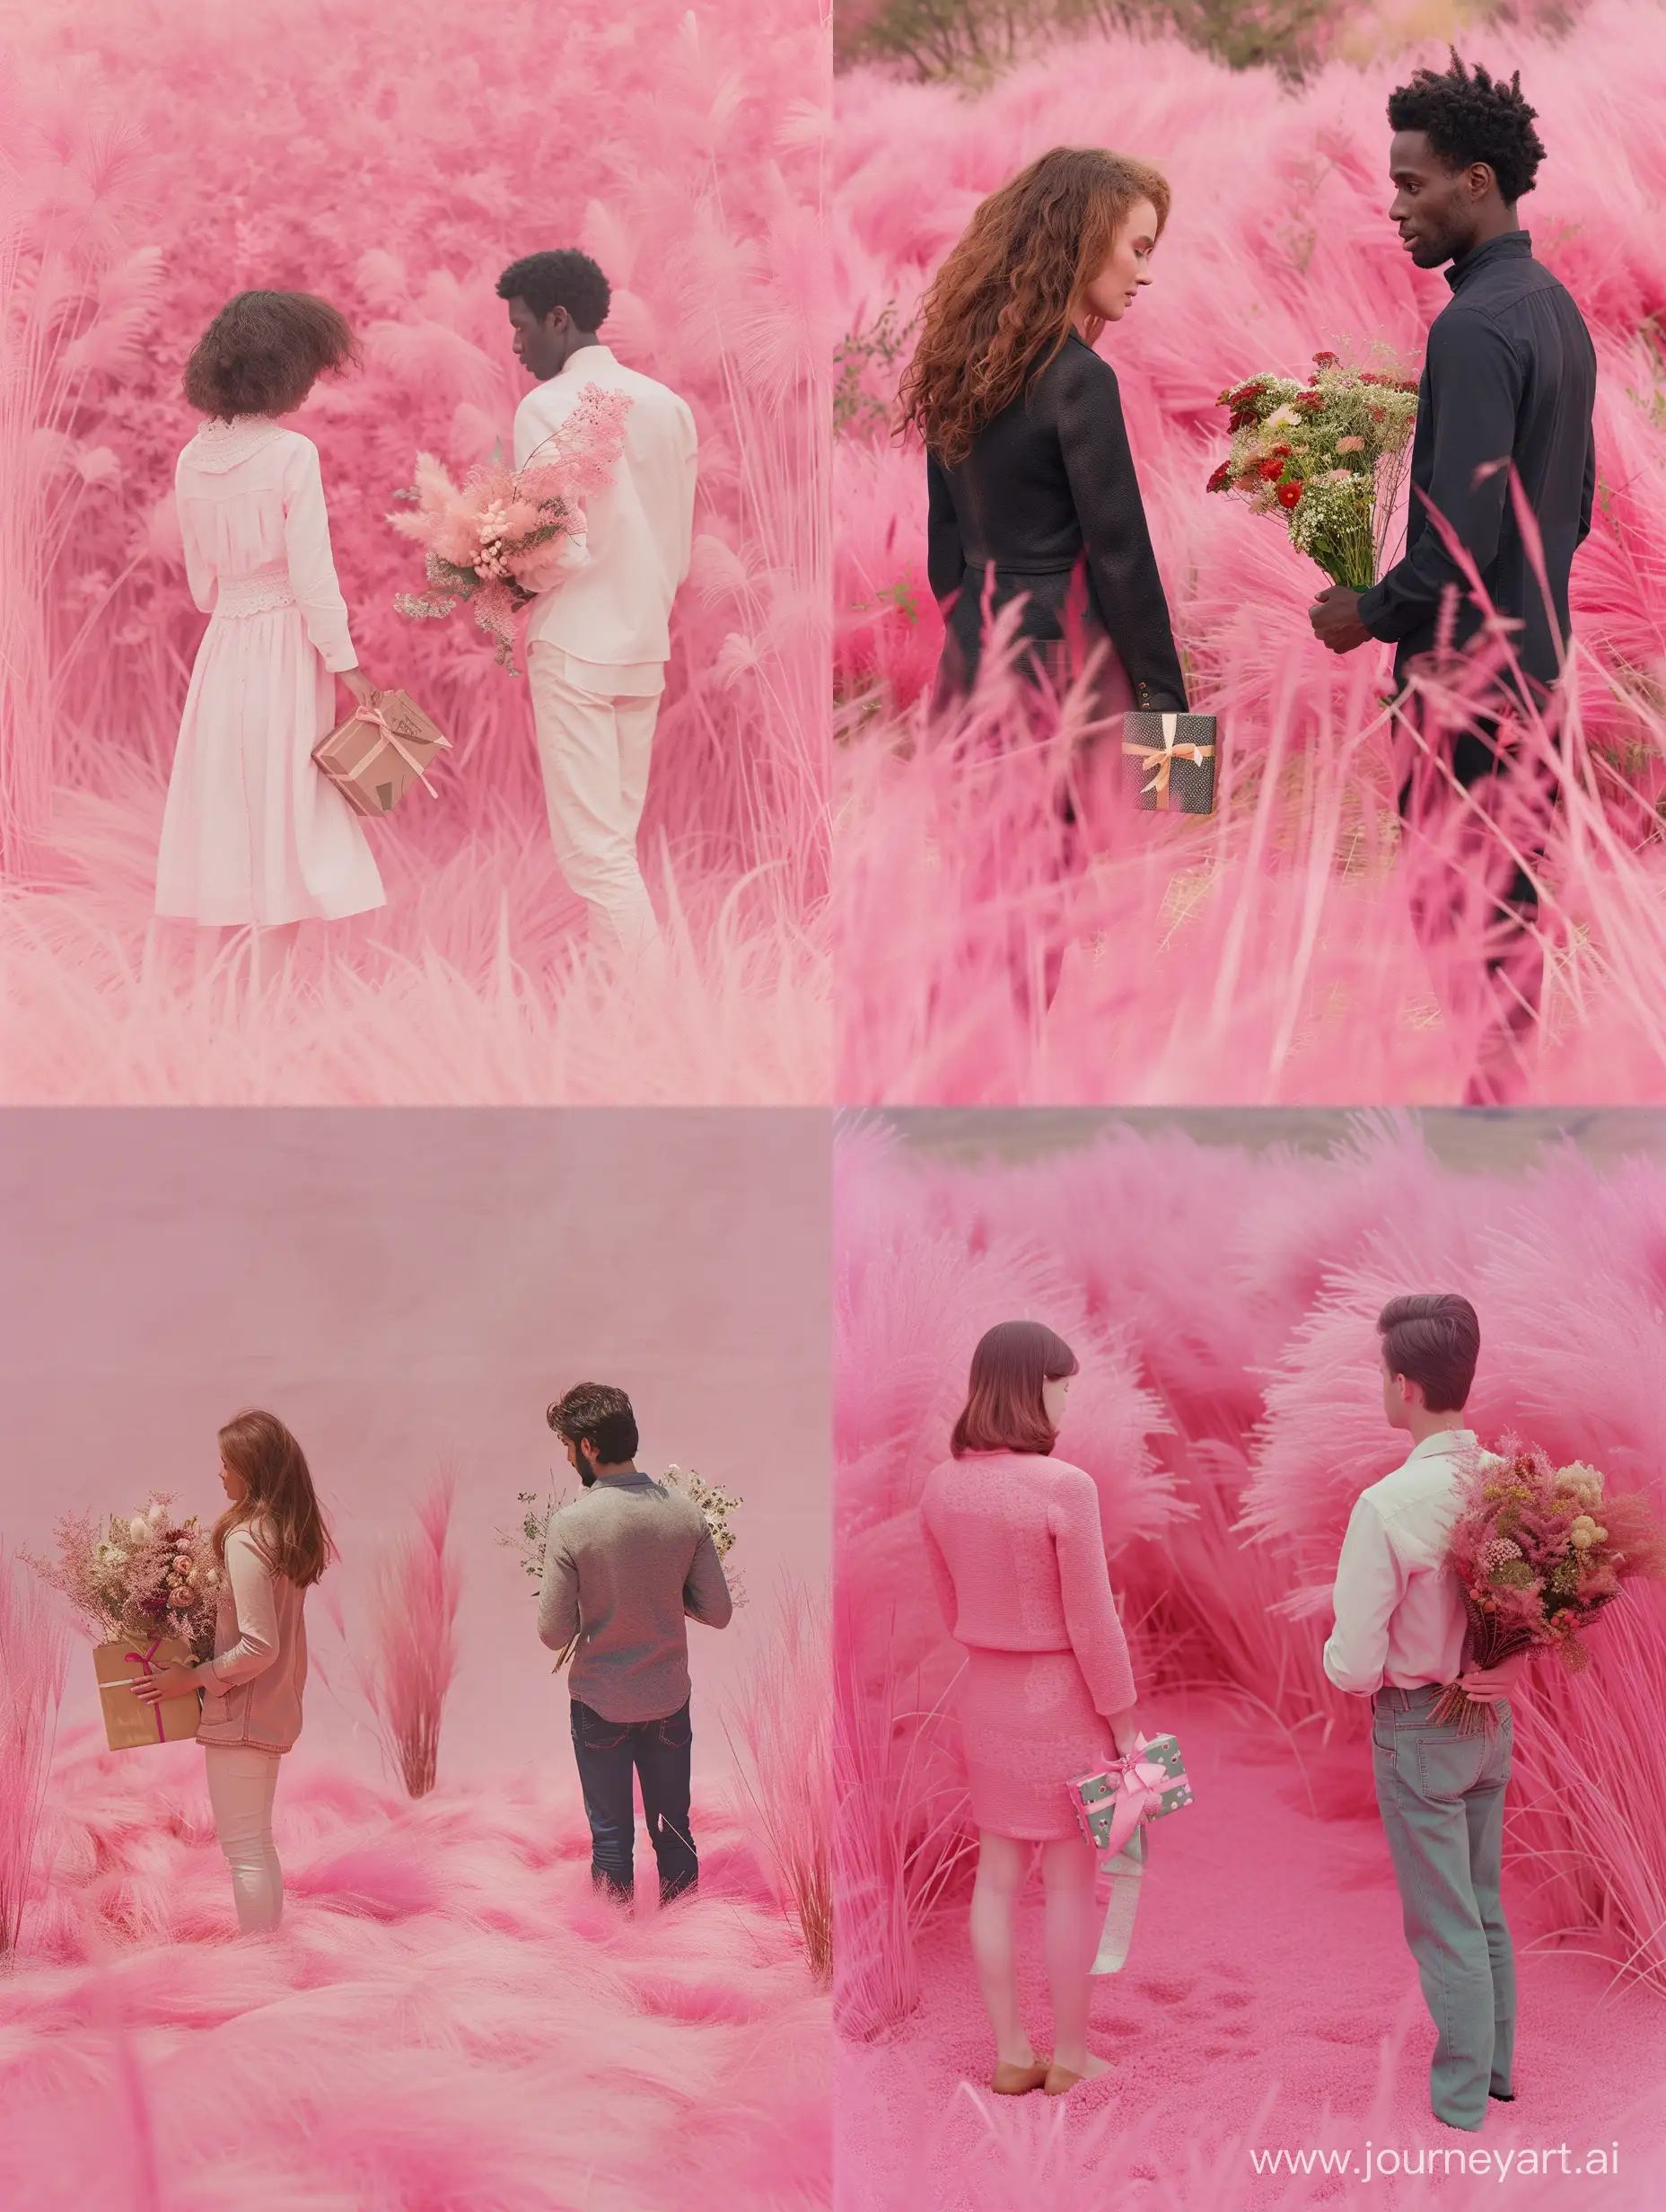 A man and a woman stand among the pink grass. facing each other The man on the right hides a bouquet of flowers behind his back. The woman on the left hides a gift box behind her back.